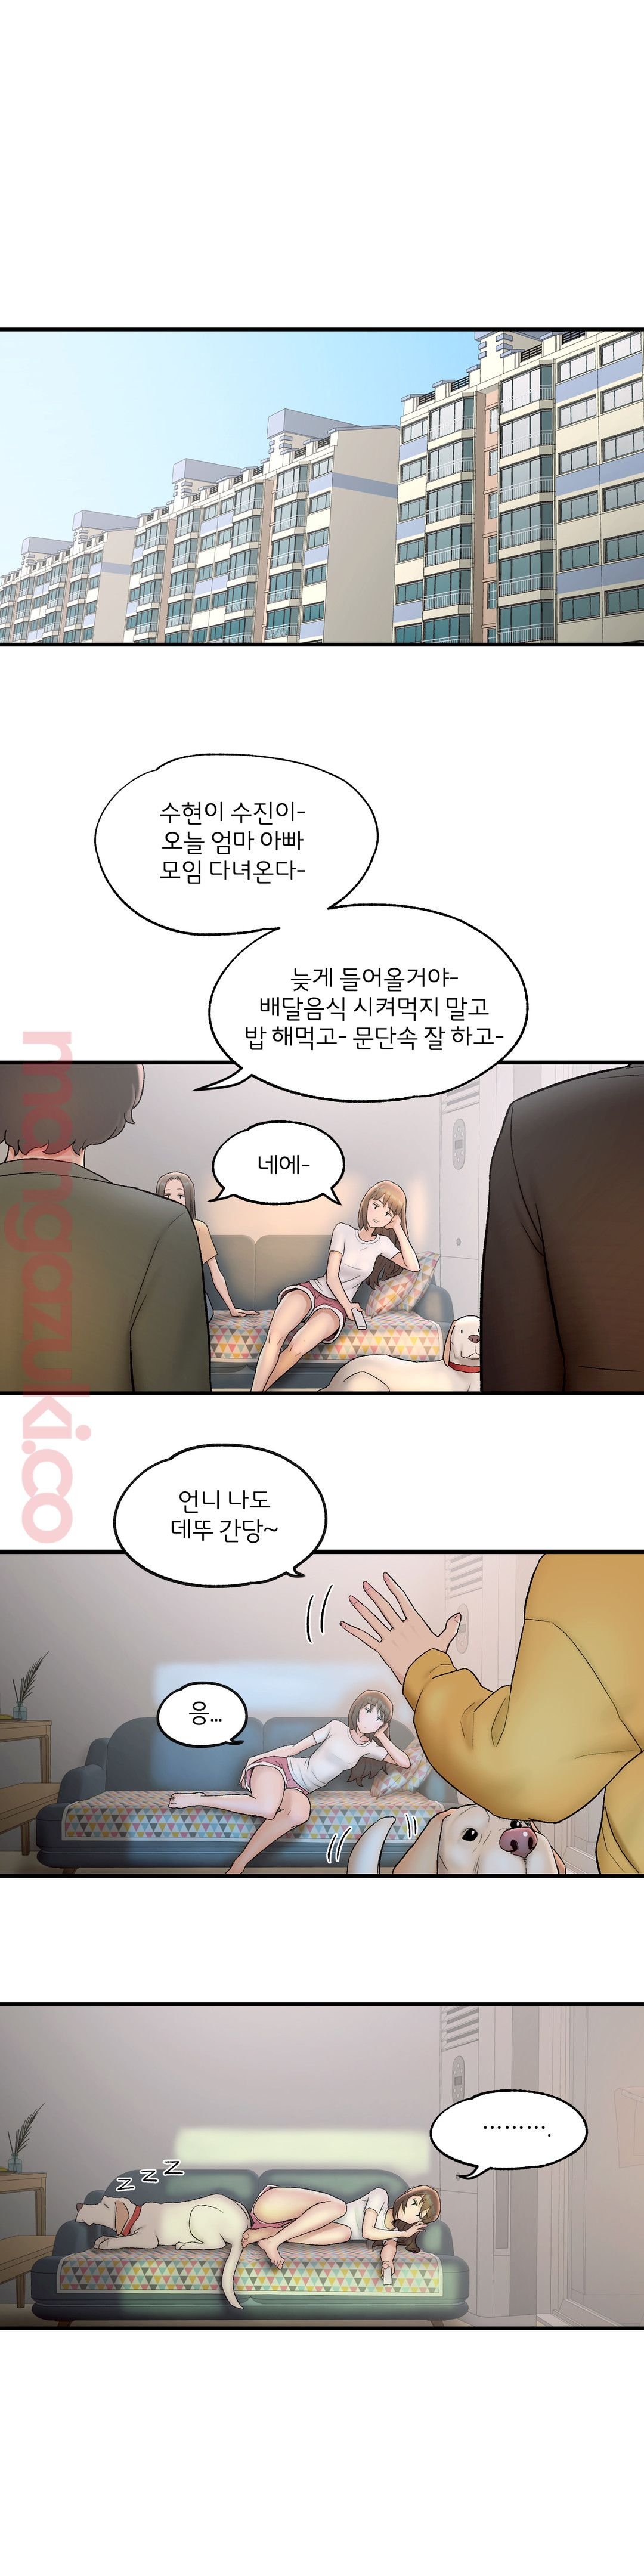 Sexercise Raw - Chapter 49 Page 7